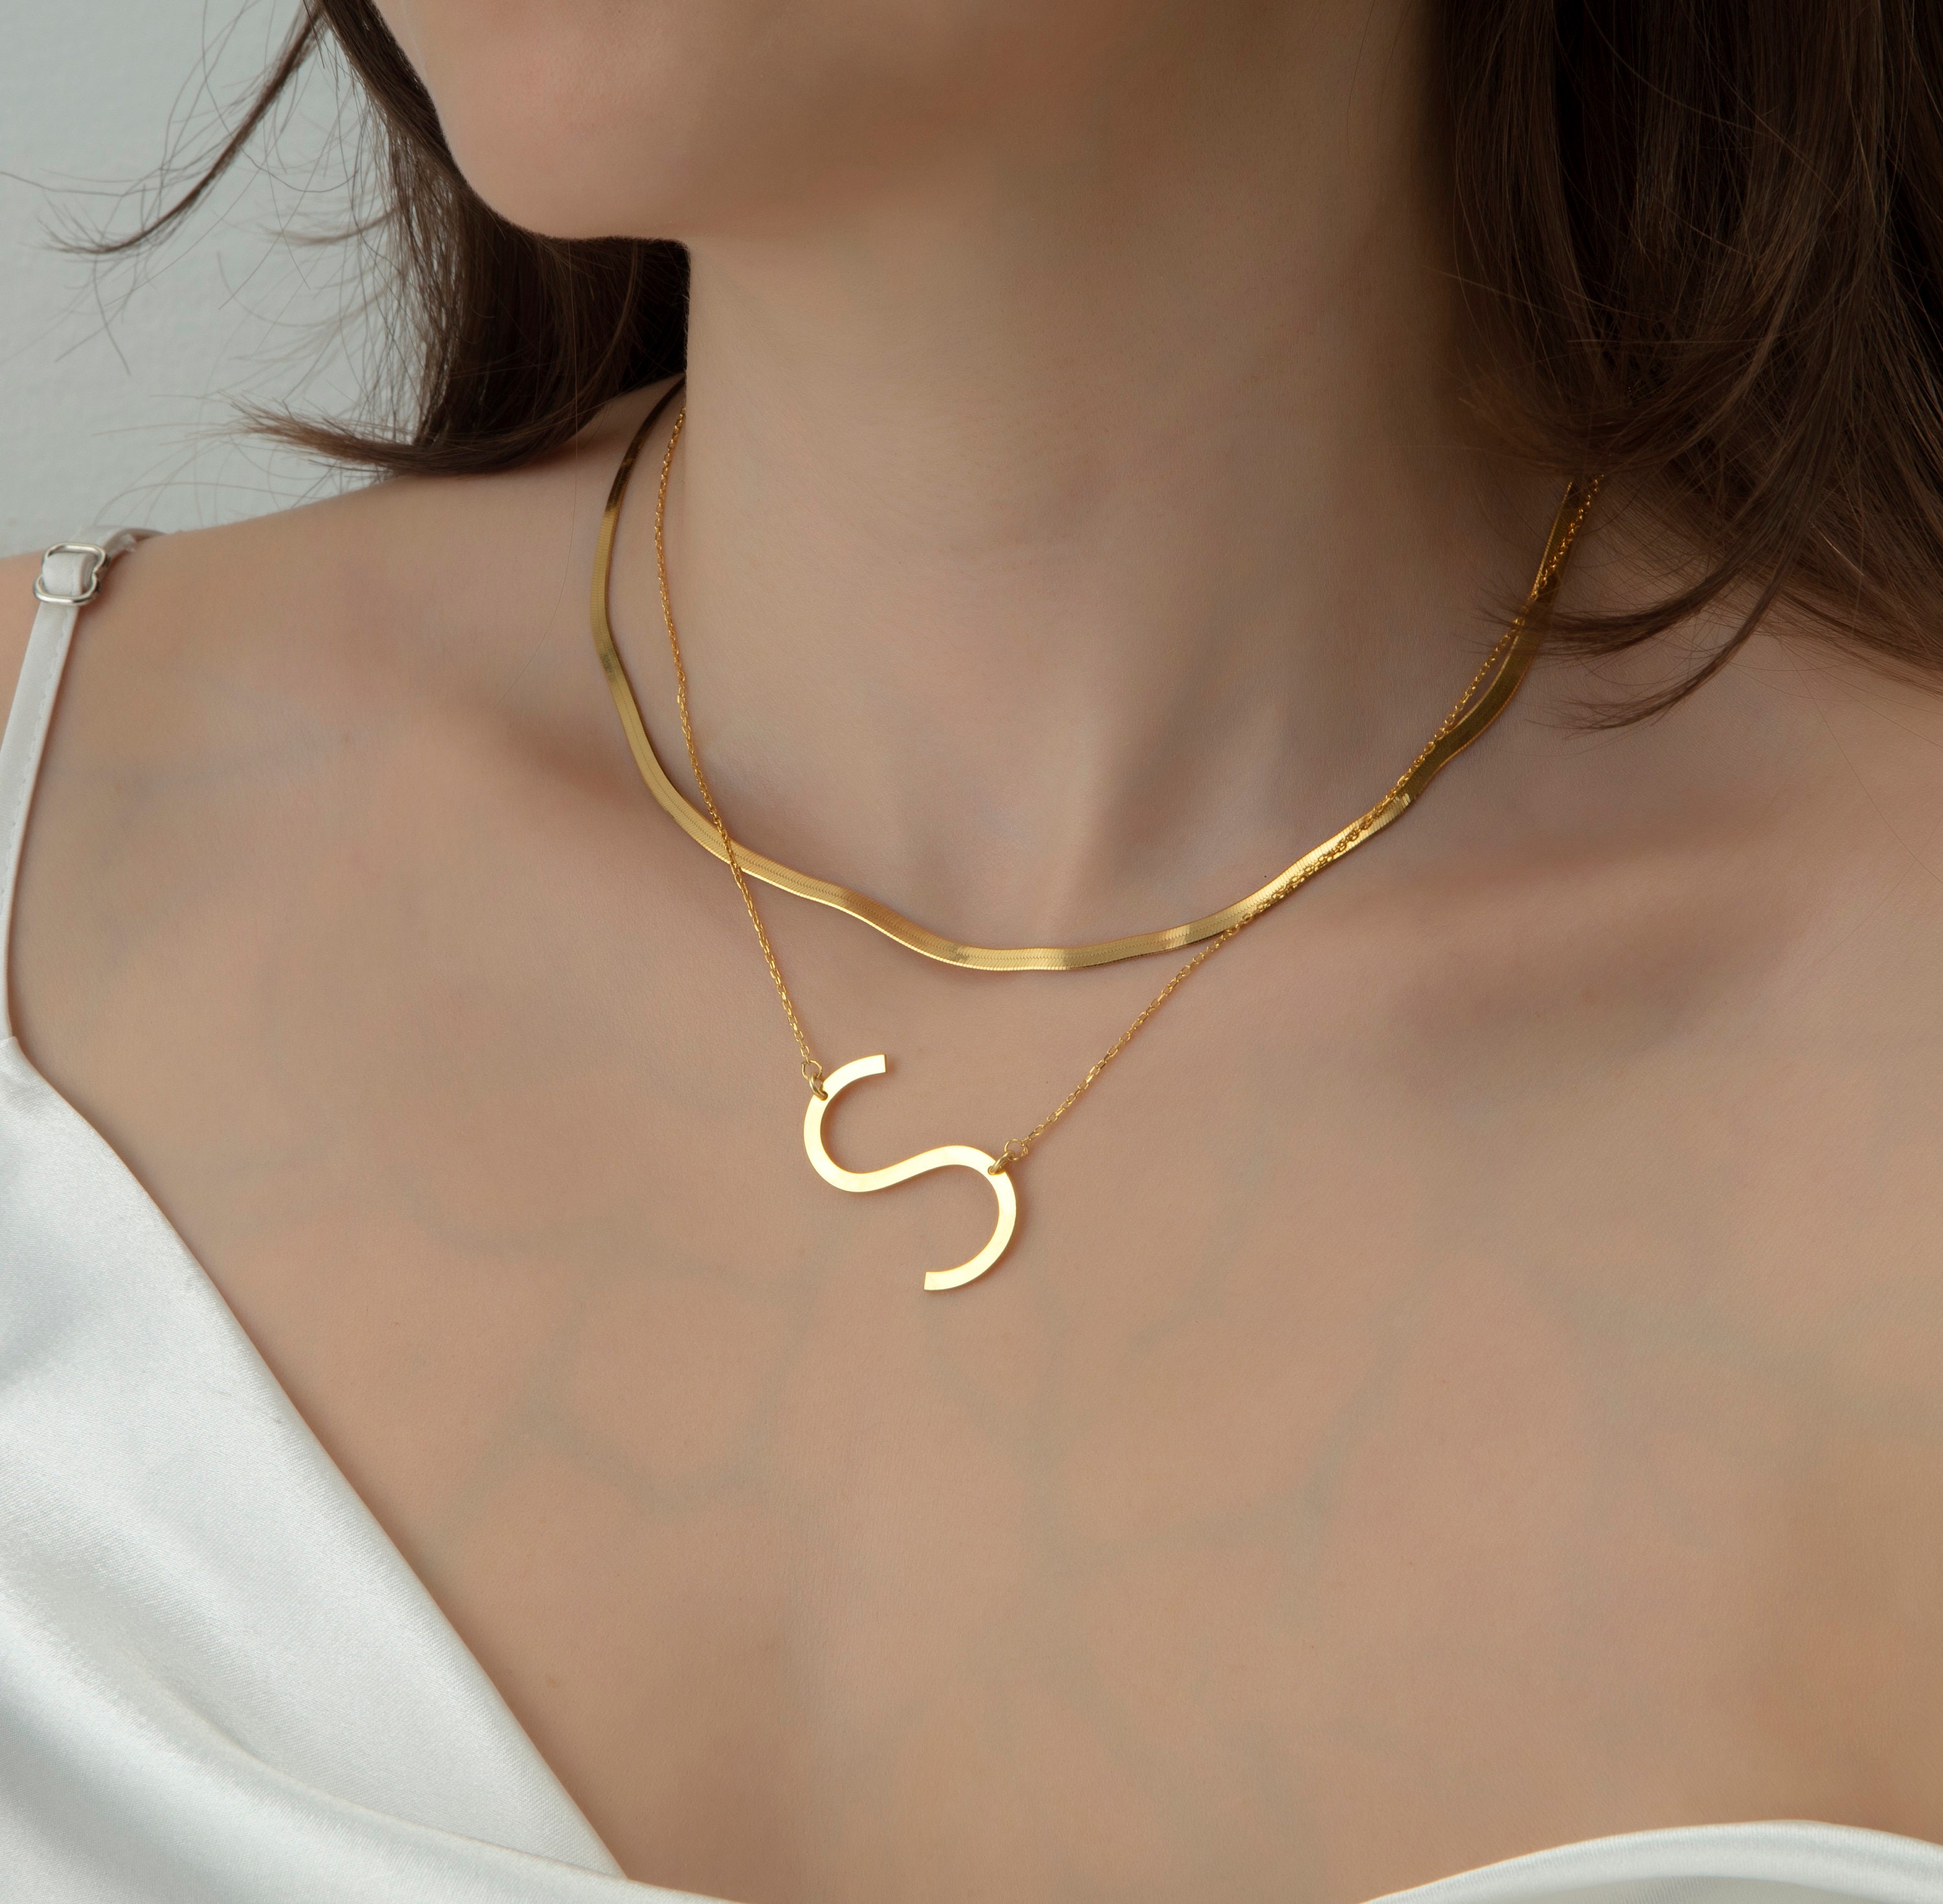 Jumbo initial / letter necklace l Sterling Silver 14K Gold Plated |  Personalized large initial necklace